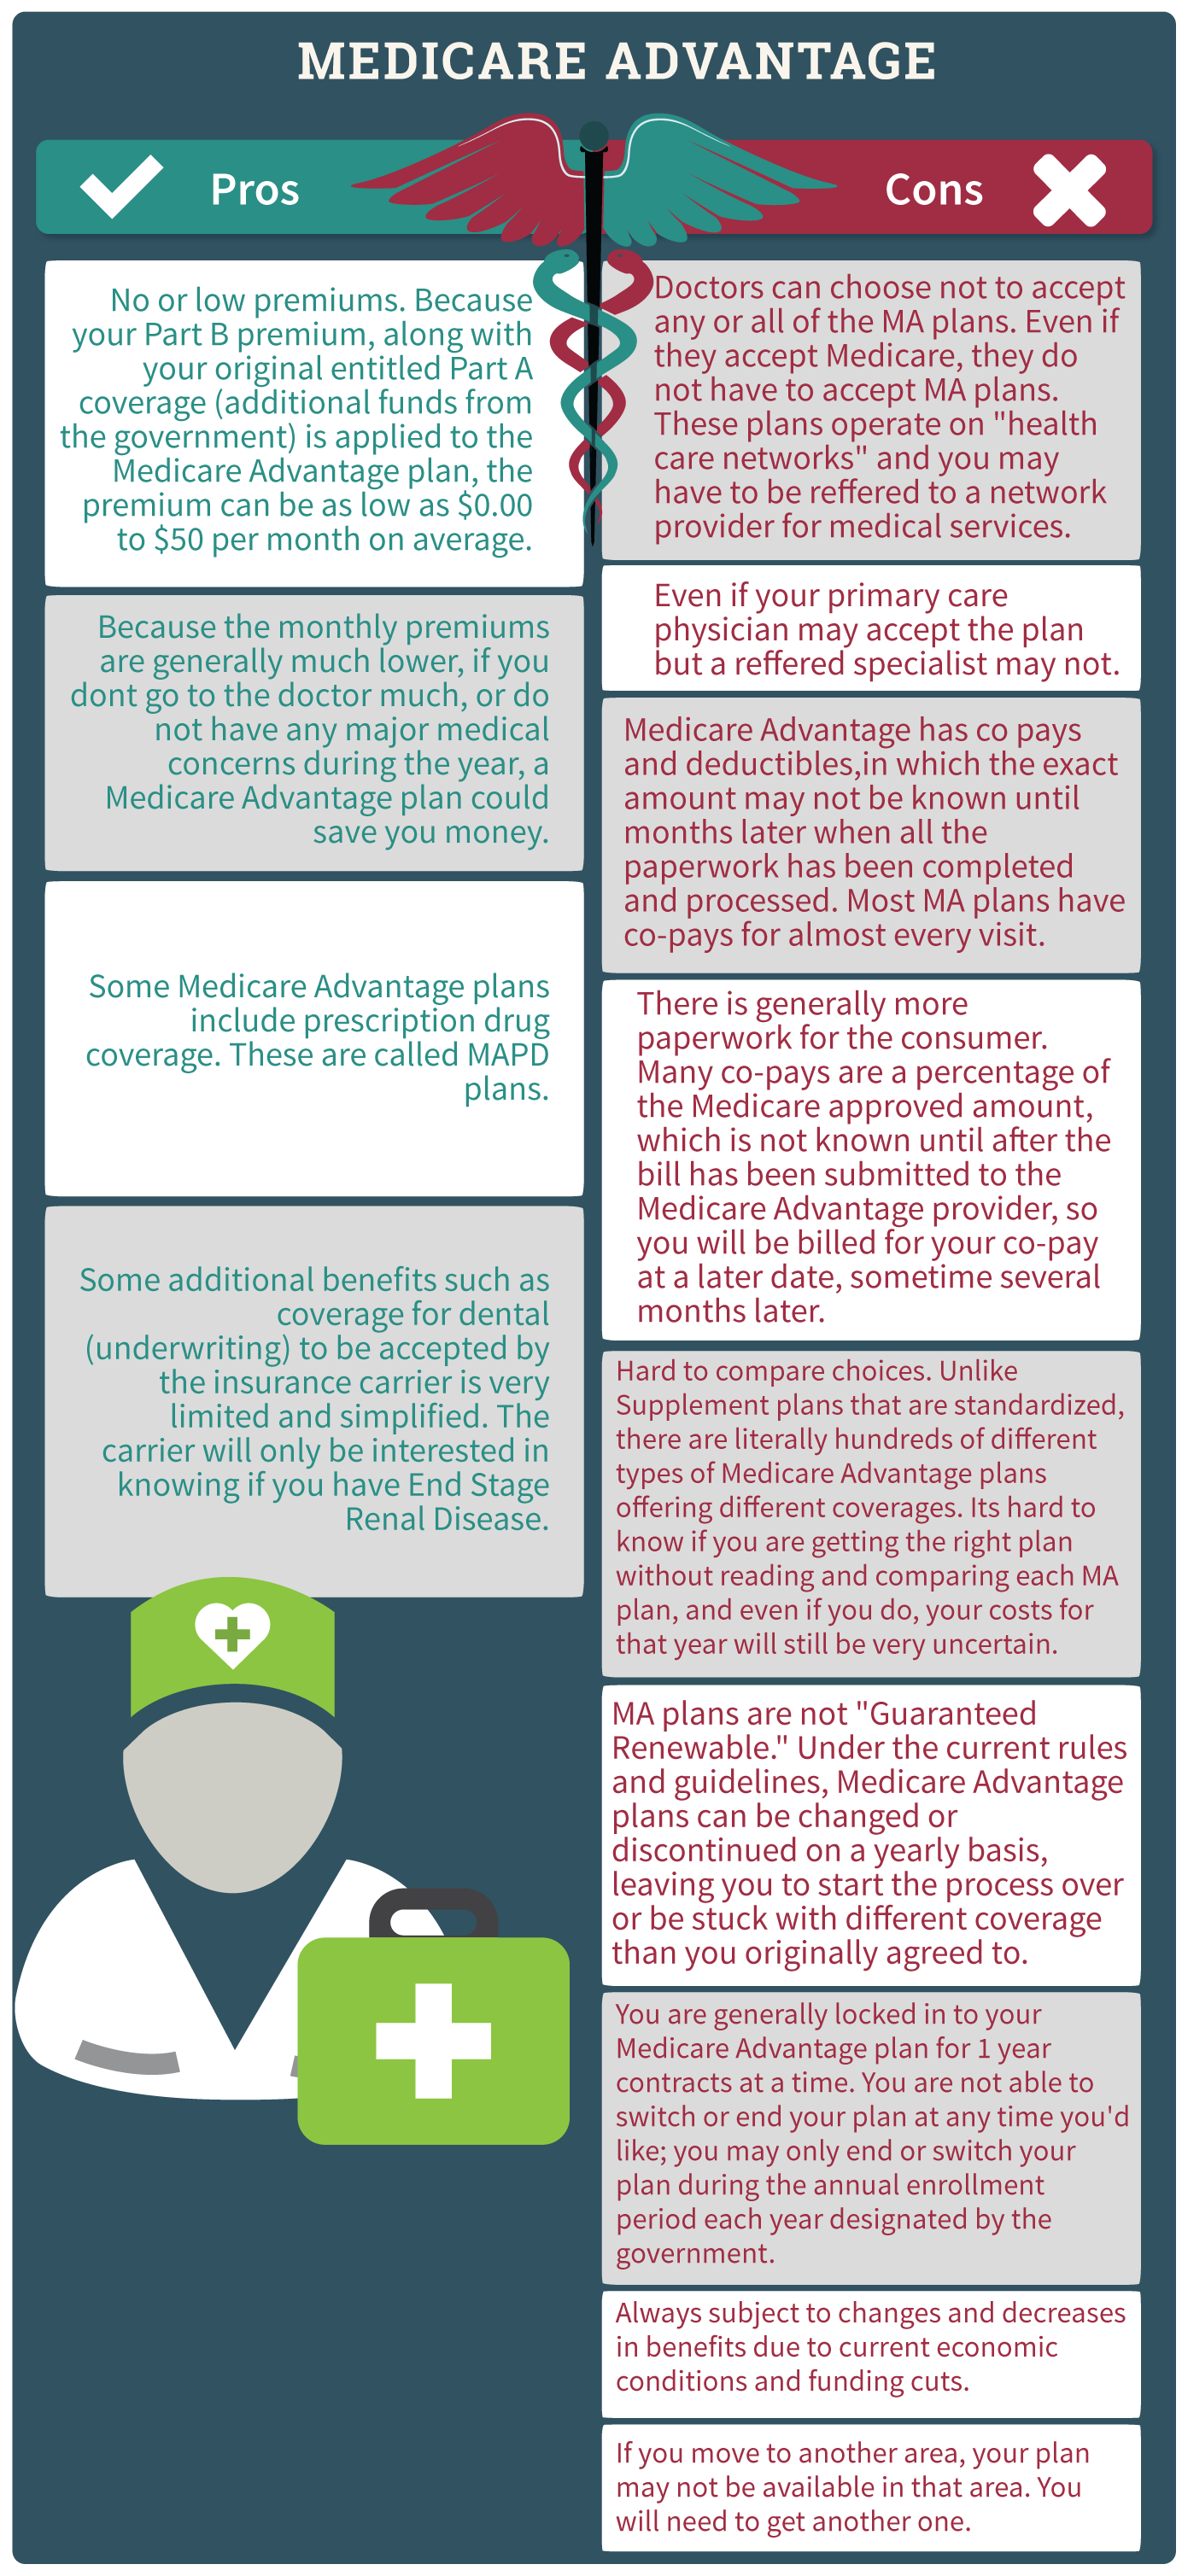 Medicare Advantage Pros and Cons